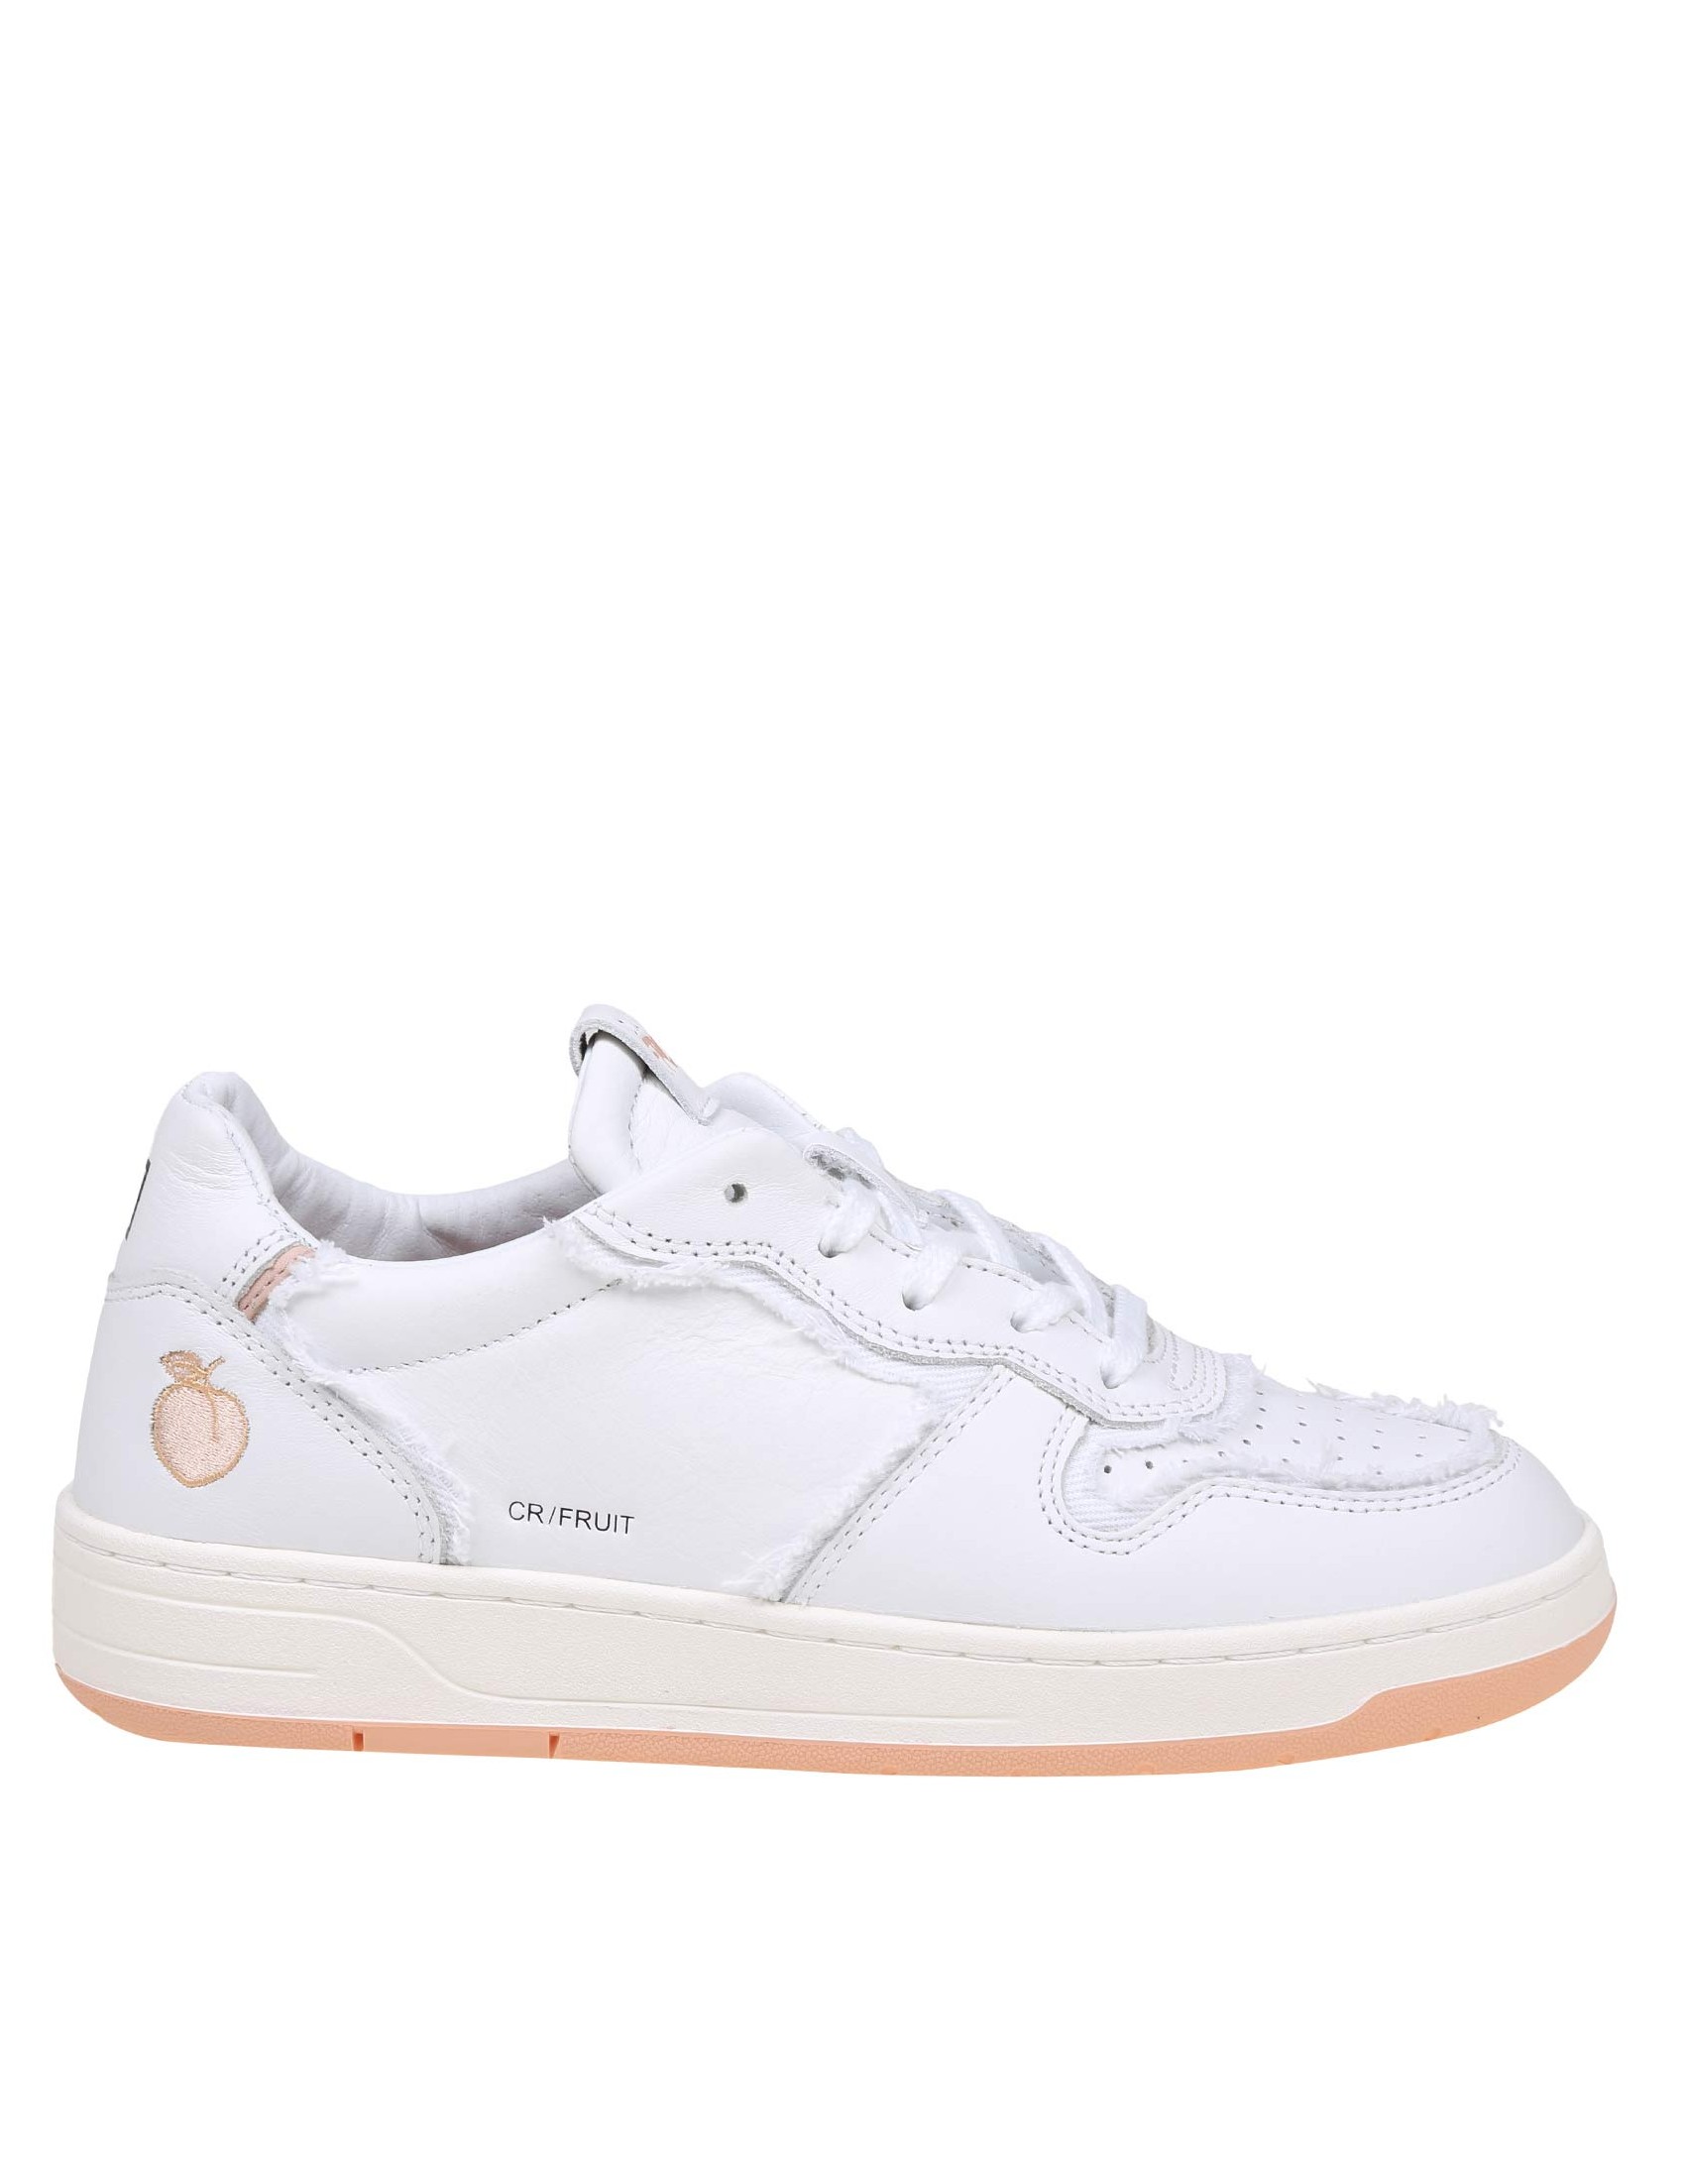 D.A.T.E. COURT SNEAKERS IN WHITE LEATHER